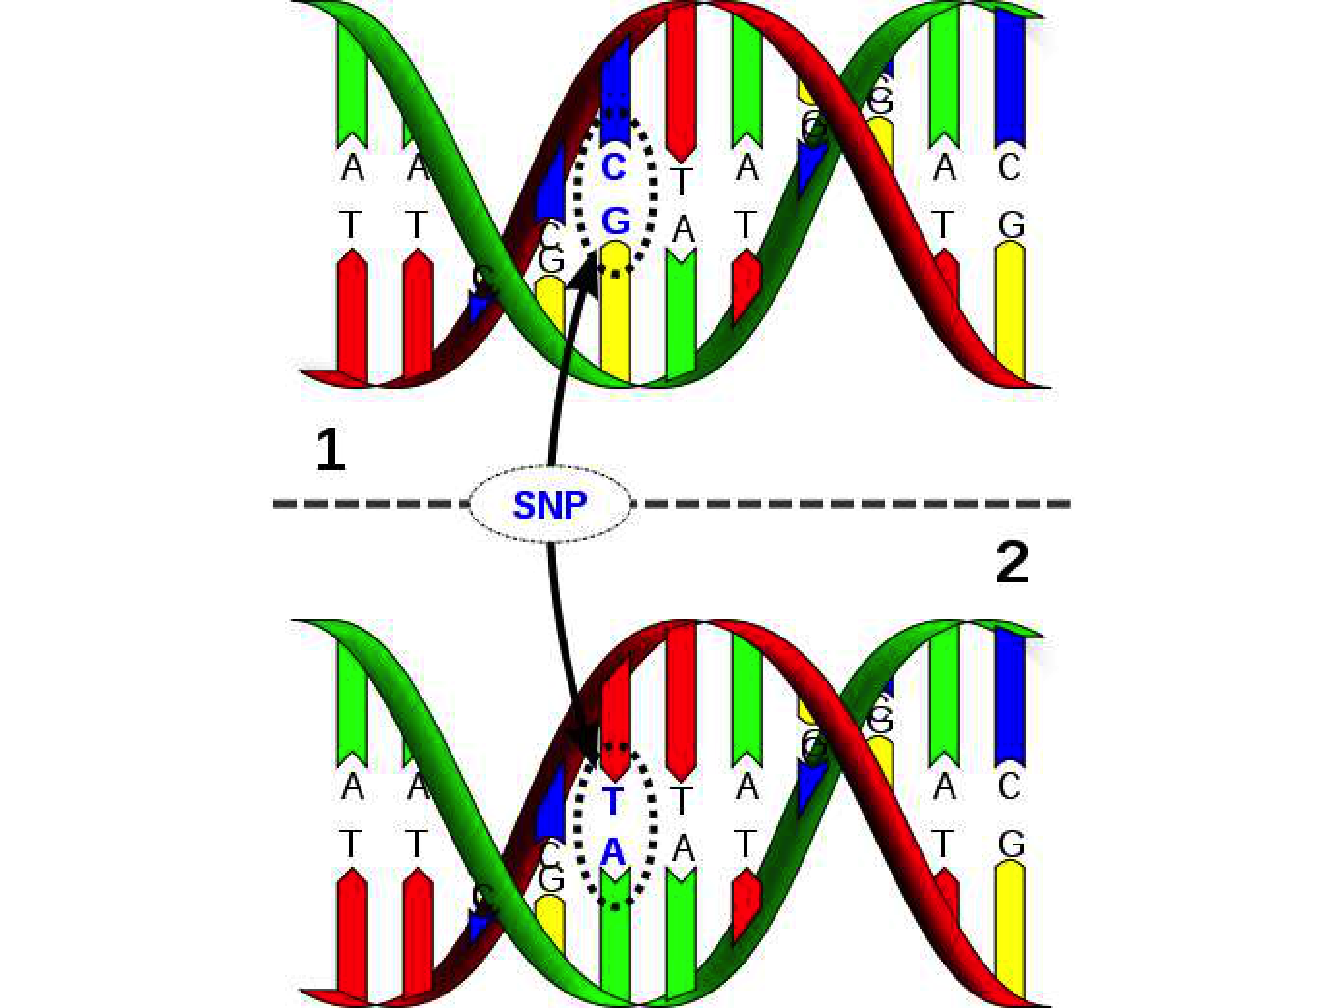 Schematic representation of a single nucleotide polymorphism. David Hall / Licence 